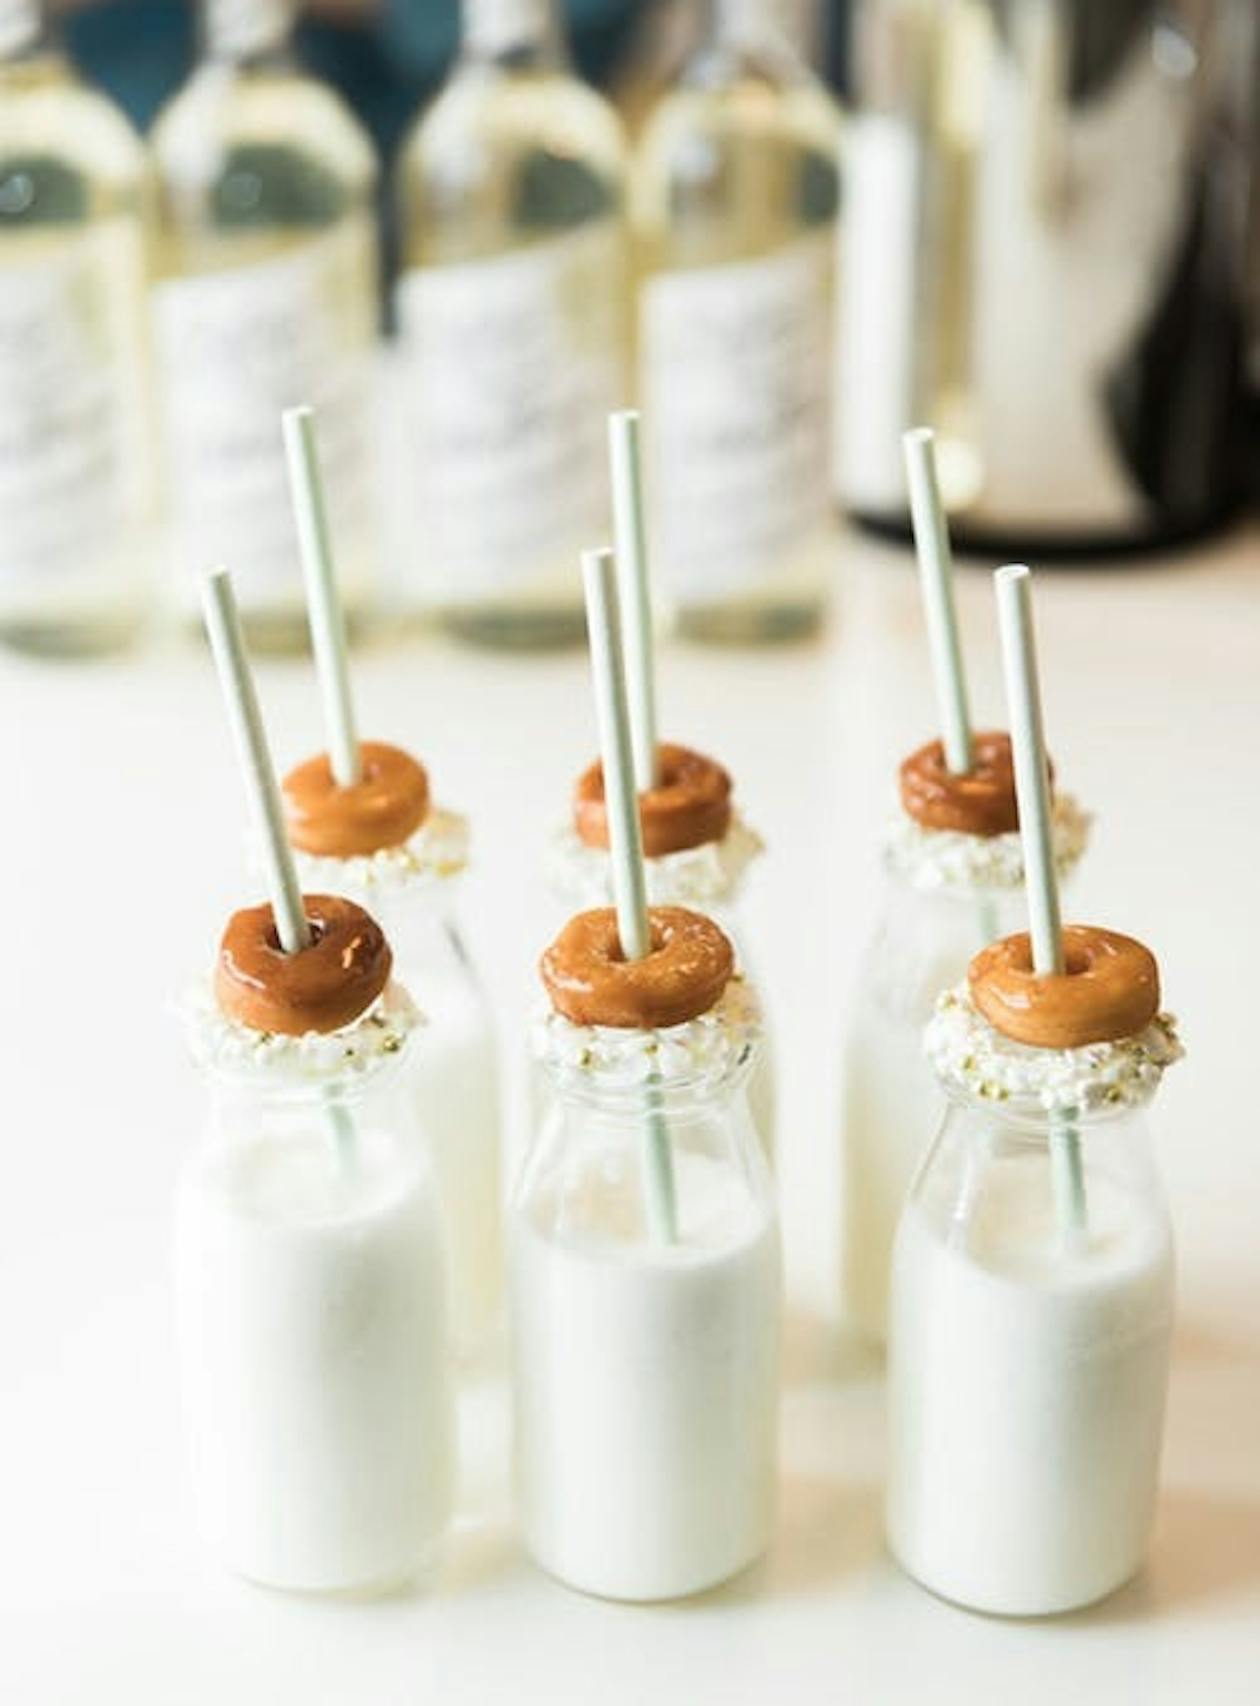 milk in glass milk cartons with a straw and a donut sitting on top of each one | PartySlate